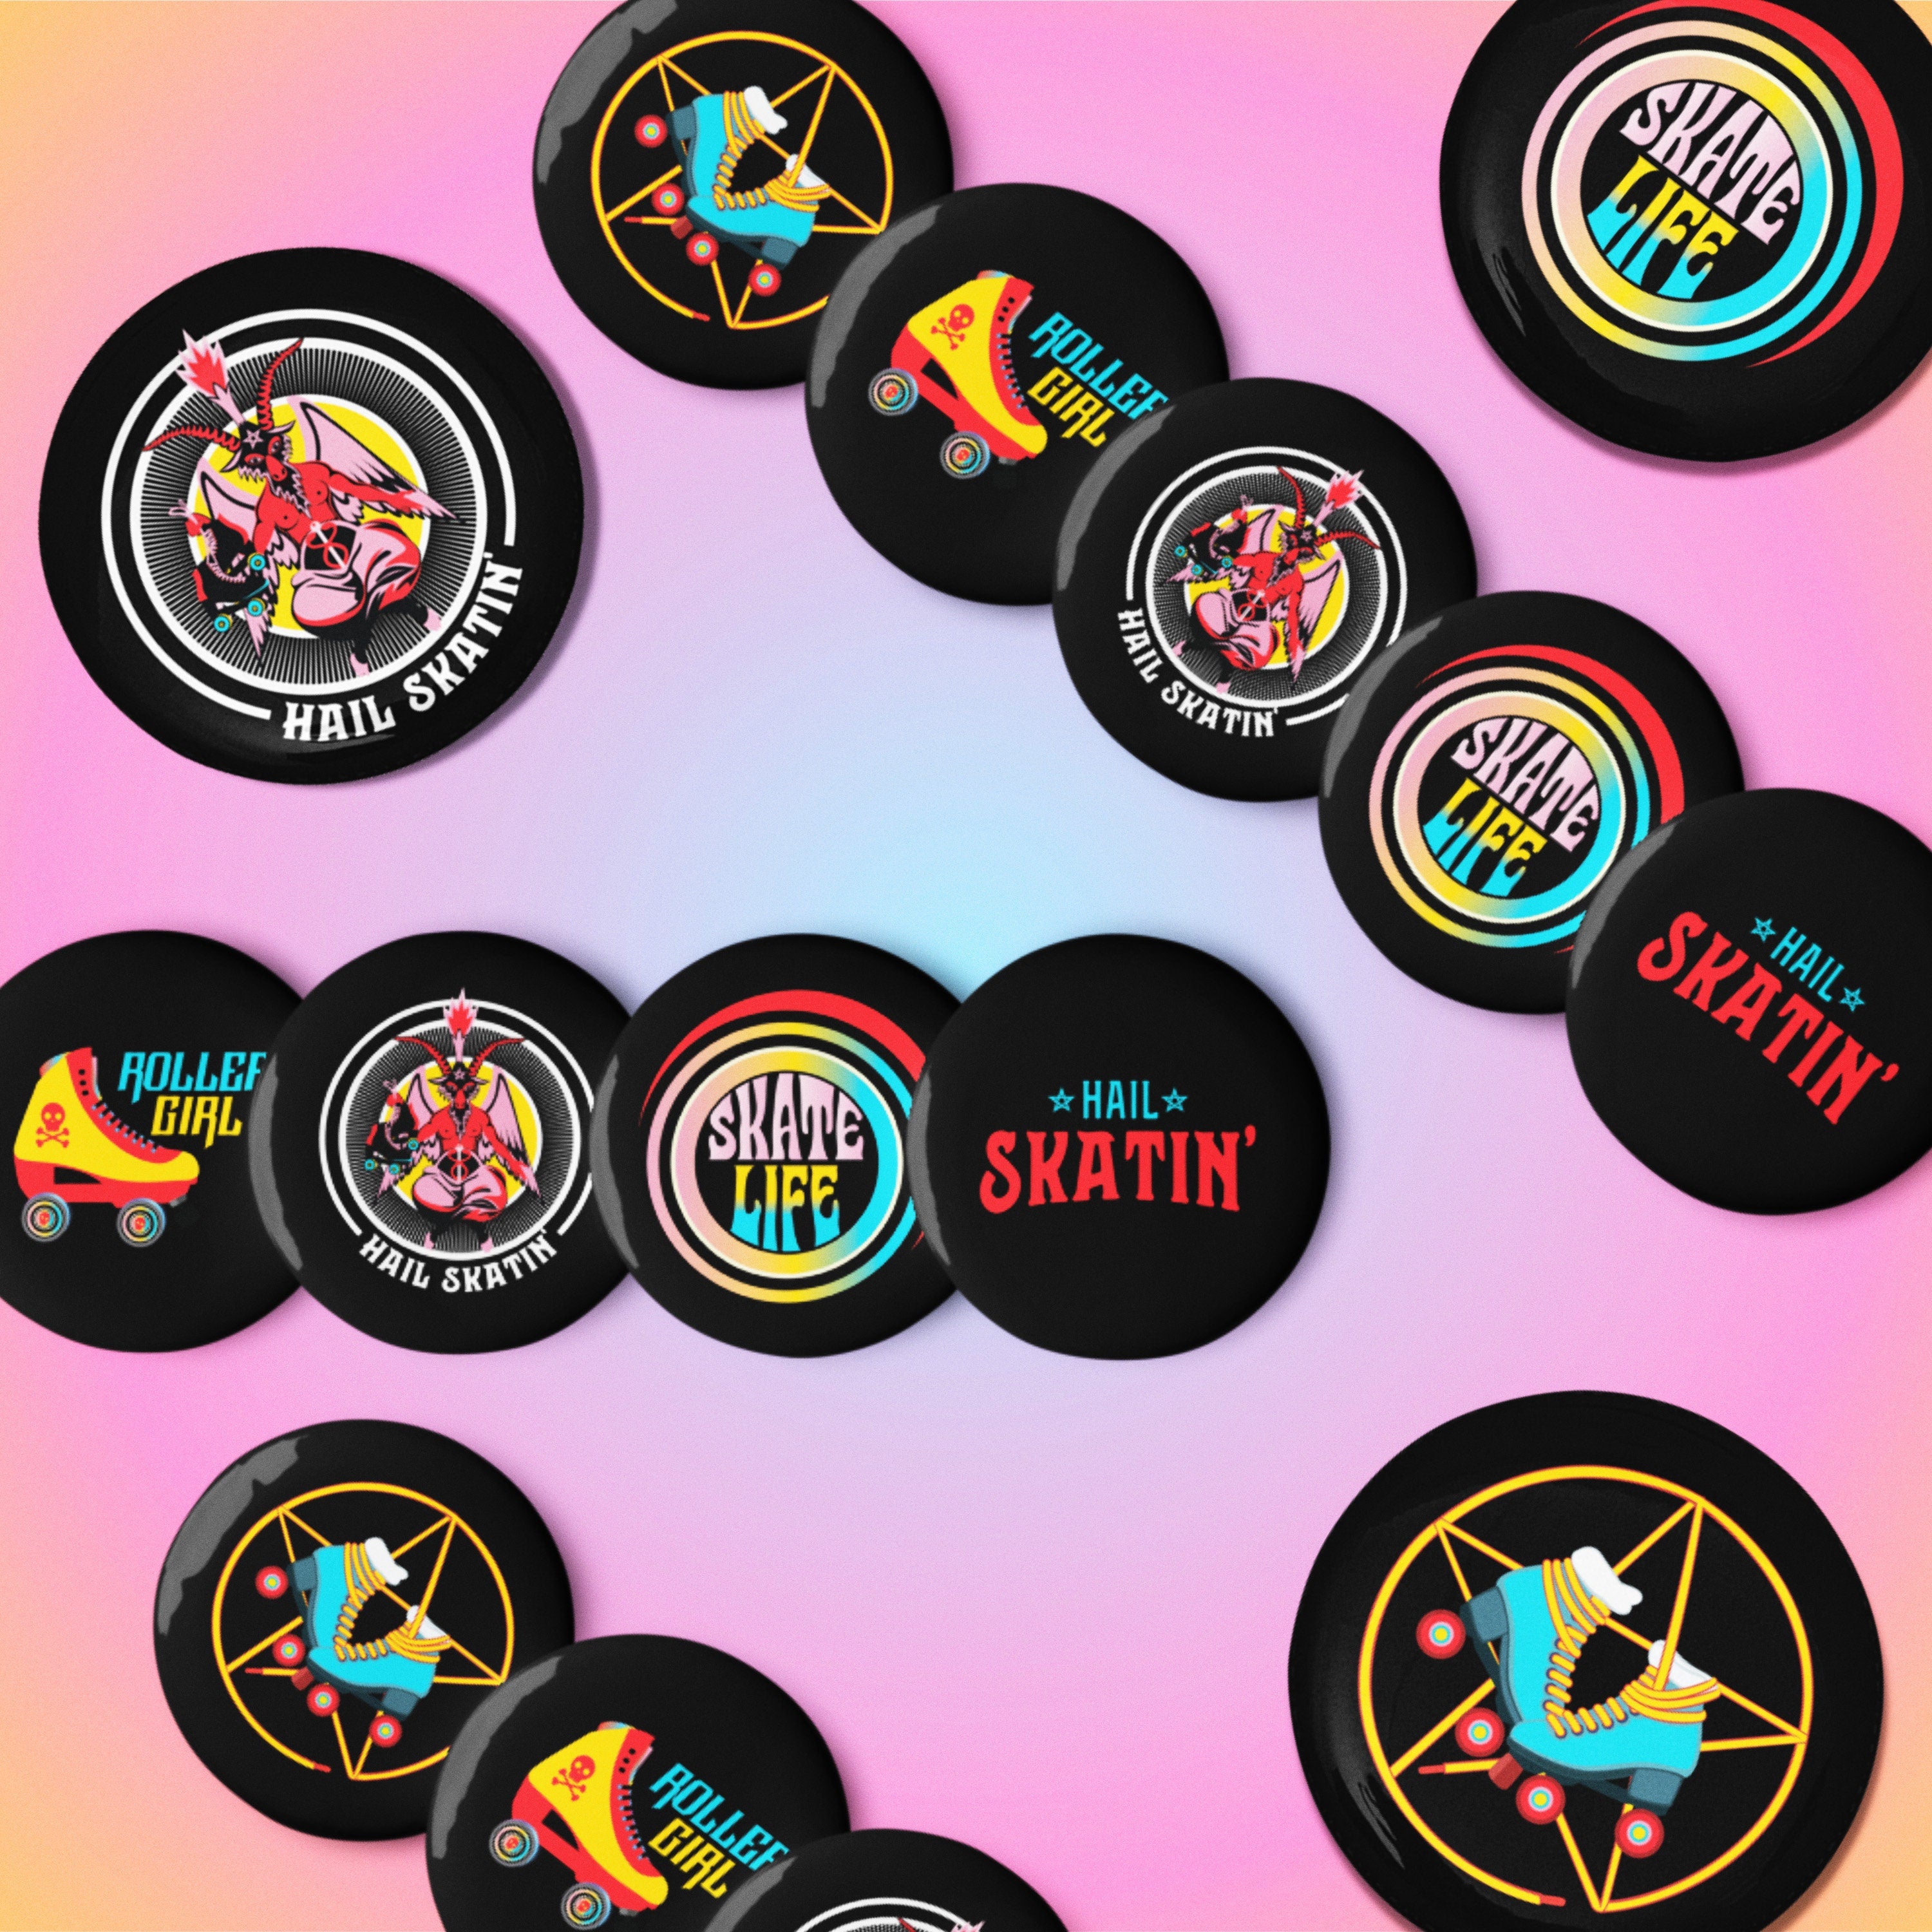 Roll with It Roller Skate Button Pins Set - 5 Pack, Skater Love, Roller Skate Accessories, Roller Skate Gifts, Roller Skate Pins